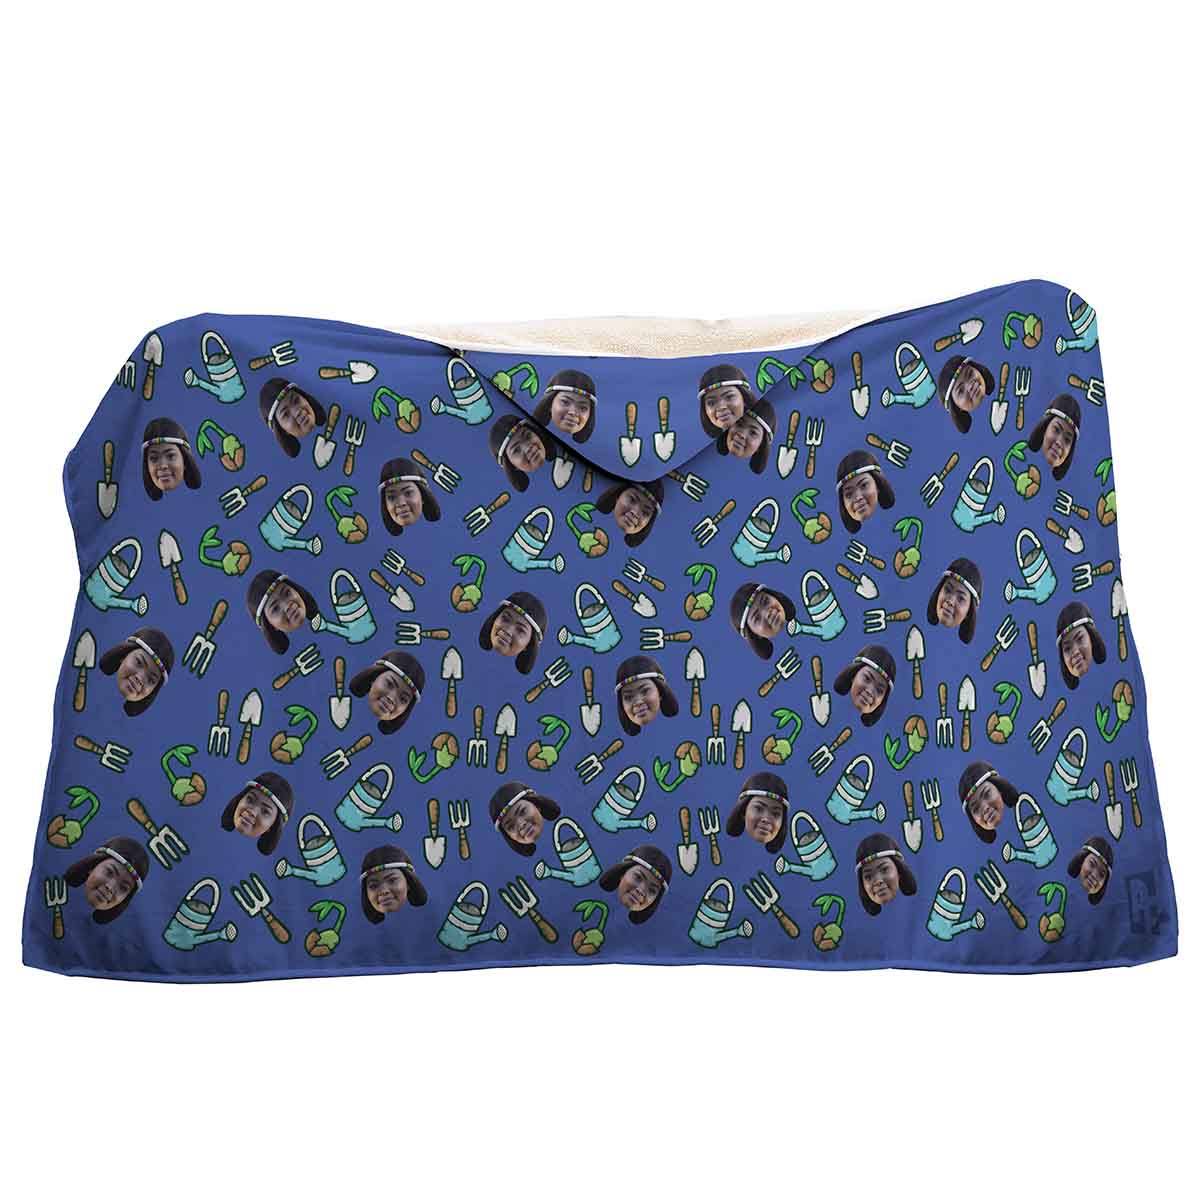 darkblue Gardening hooded blanket personalized with photo of face printed on it